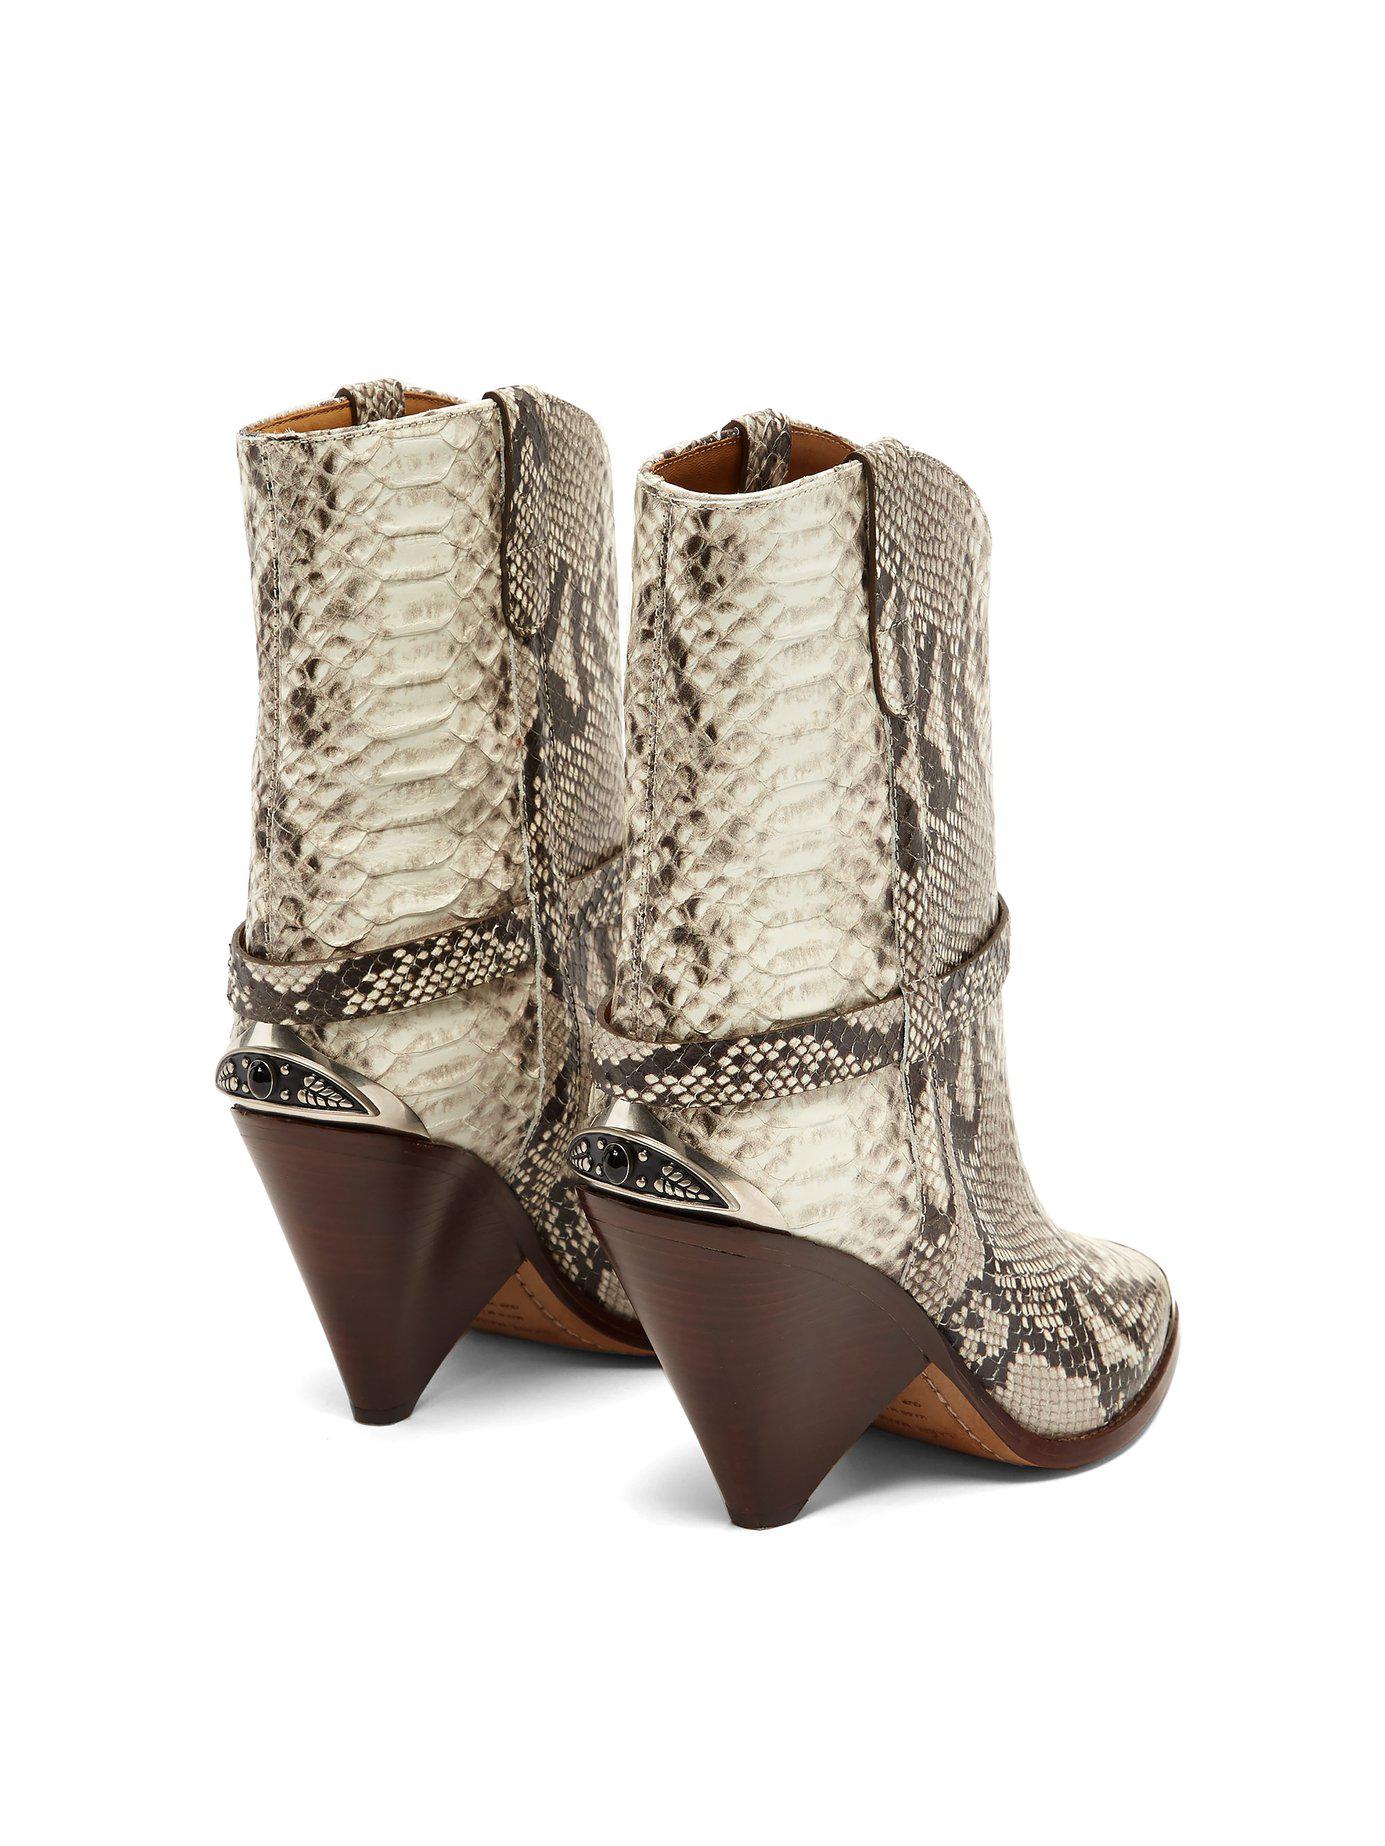 Isabel Marant Lamsy Embellished Snake-effect Leather Ankle Boots in White |  Lyst